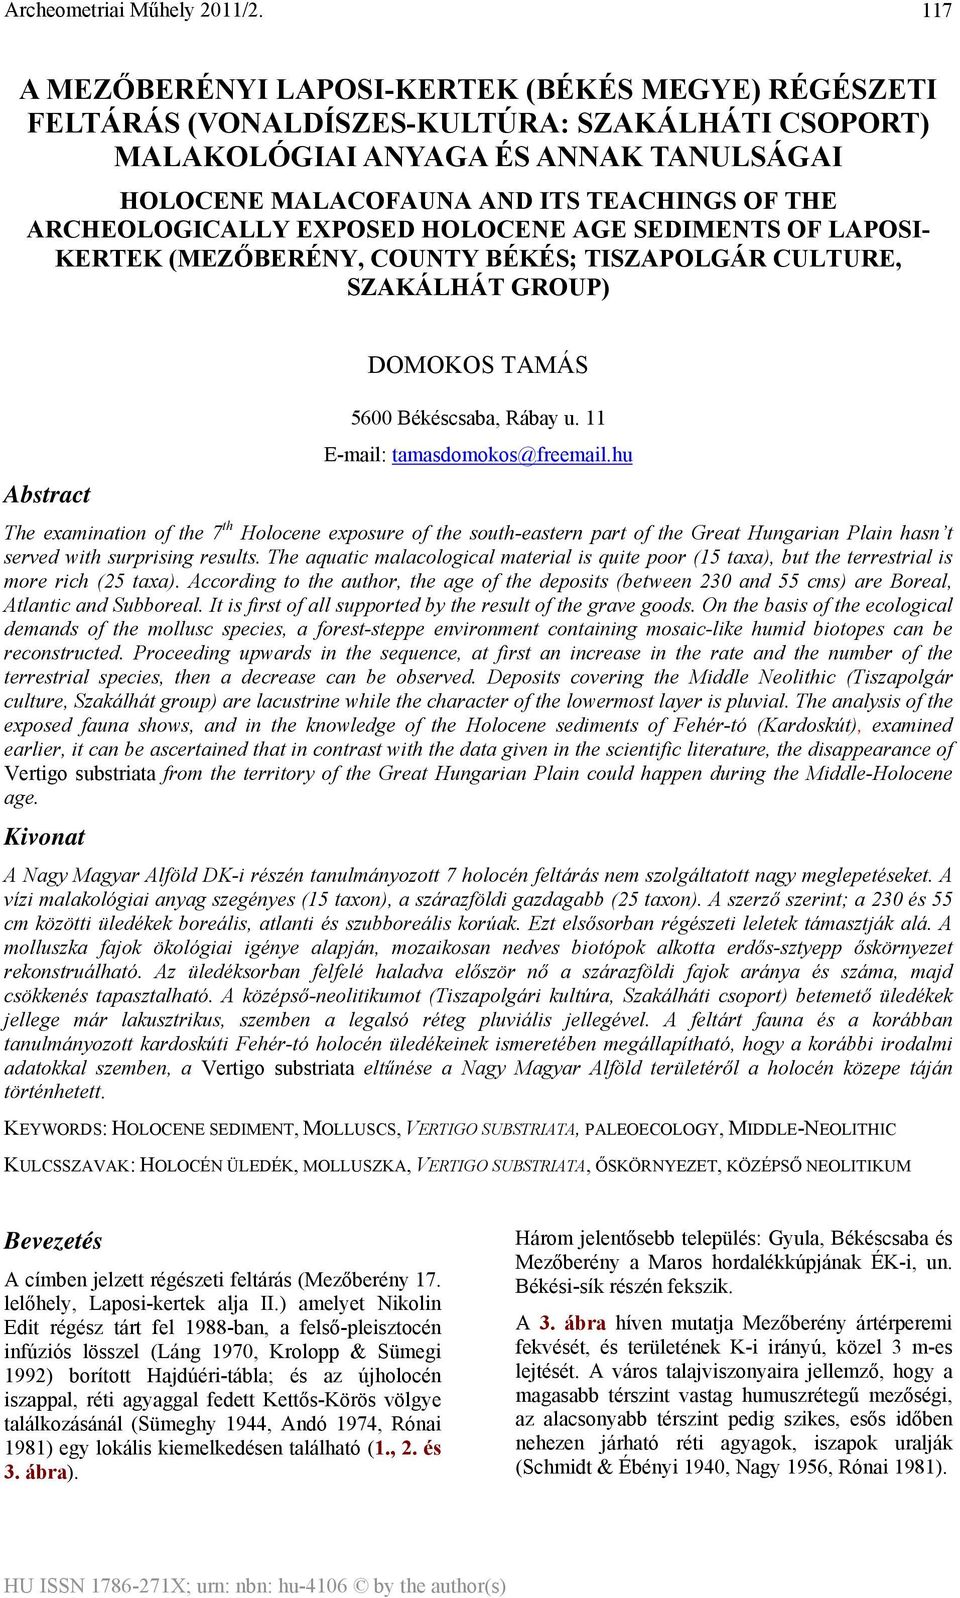 11 E-mail: tamasdomokos@freemail.hu The examination of the 7 th Holocene exposure of the south-eastern part of the Great Hungarian Plain hasn t served with surprising results.